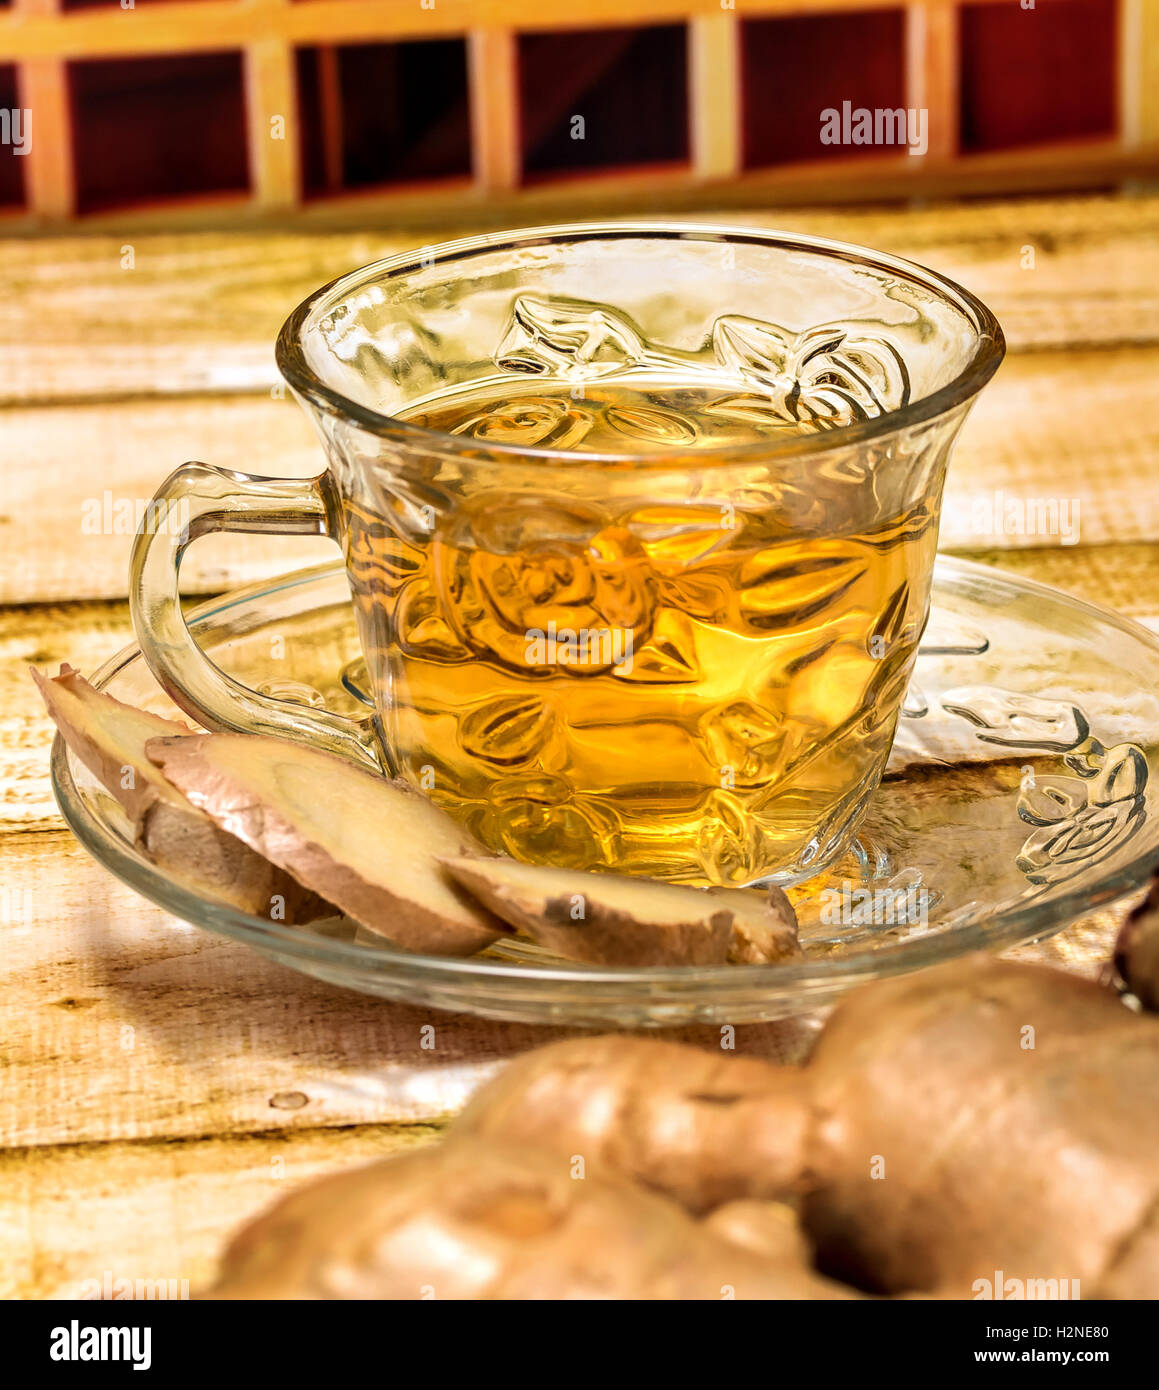 Refreshing Ginger Tea Representing Teas Organics And Spices Stock Photo